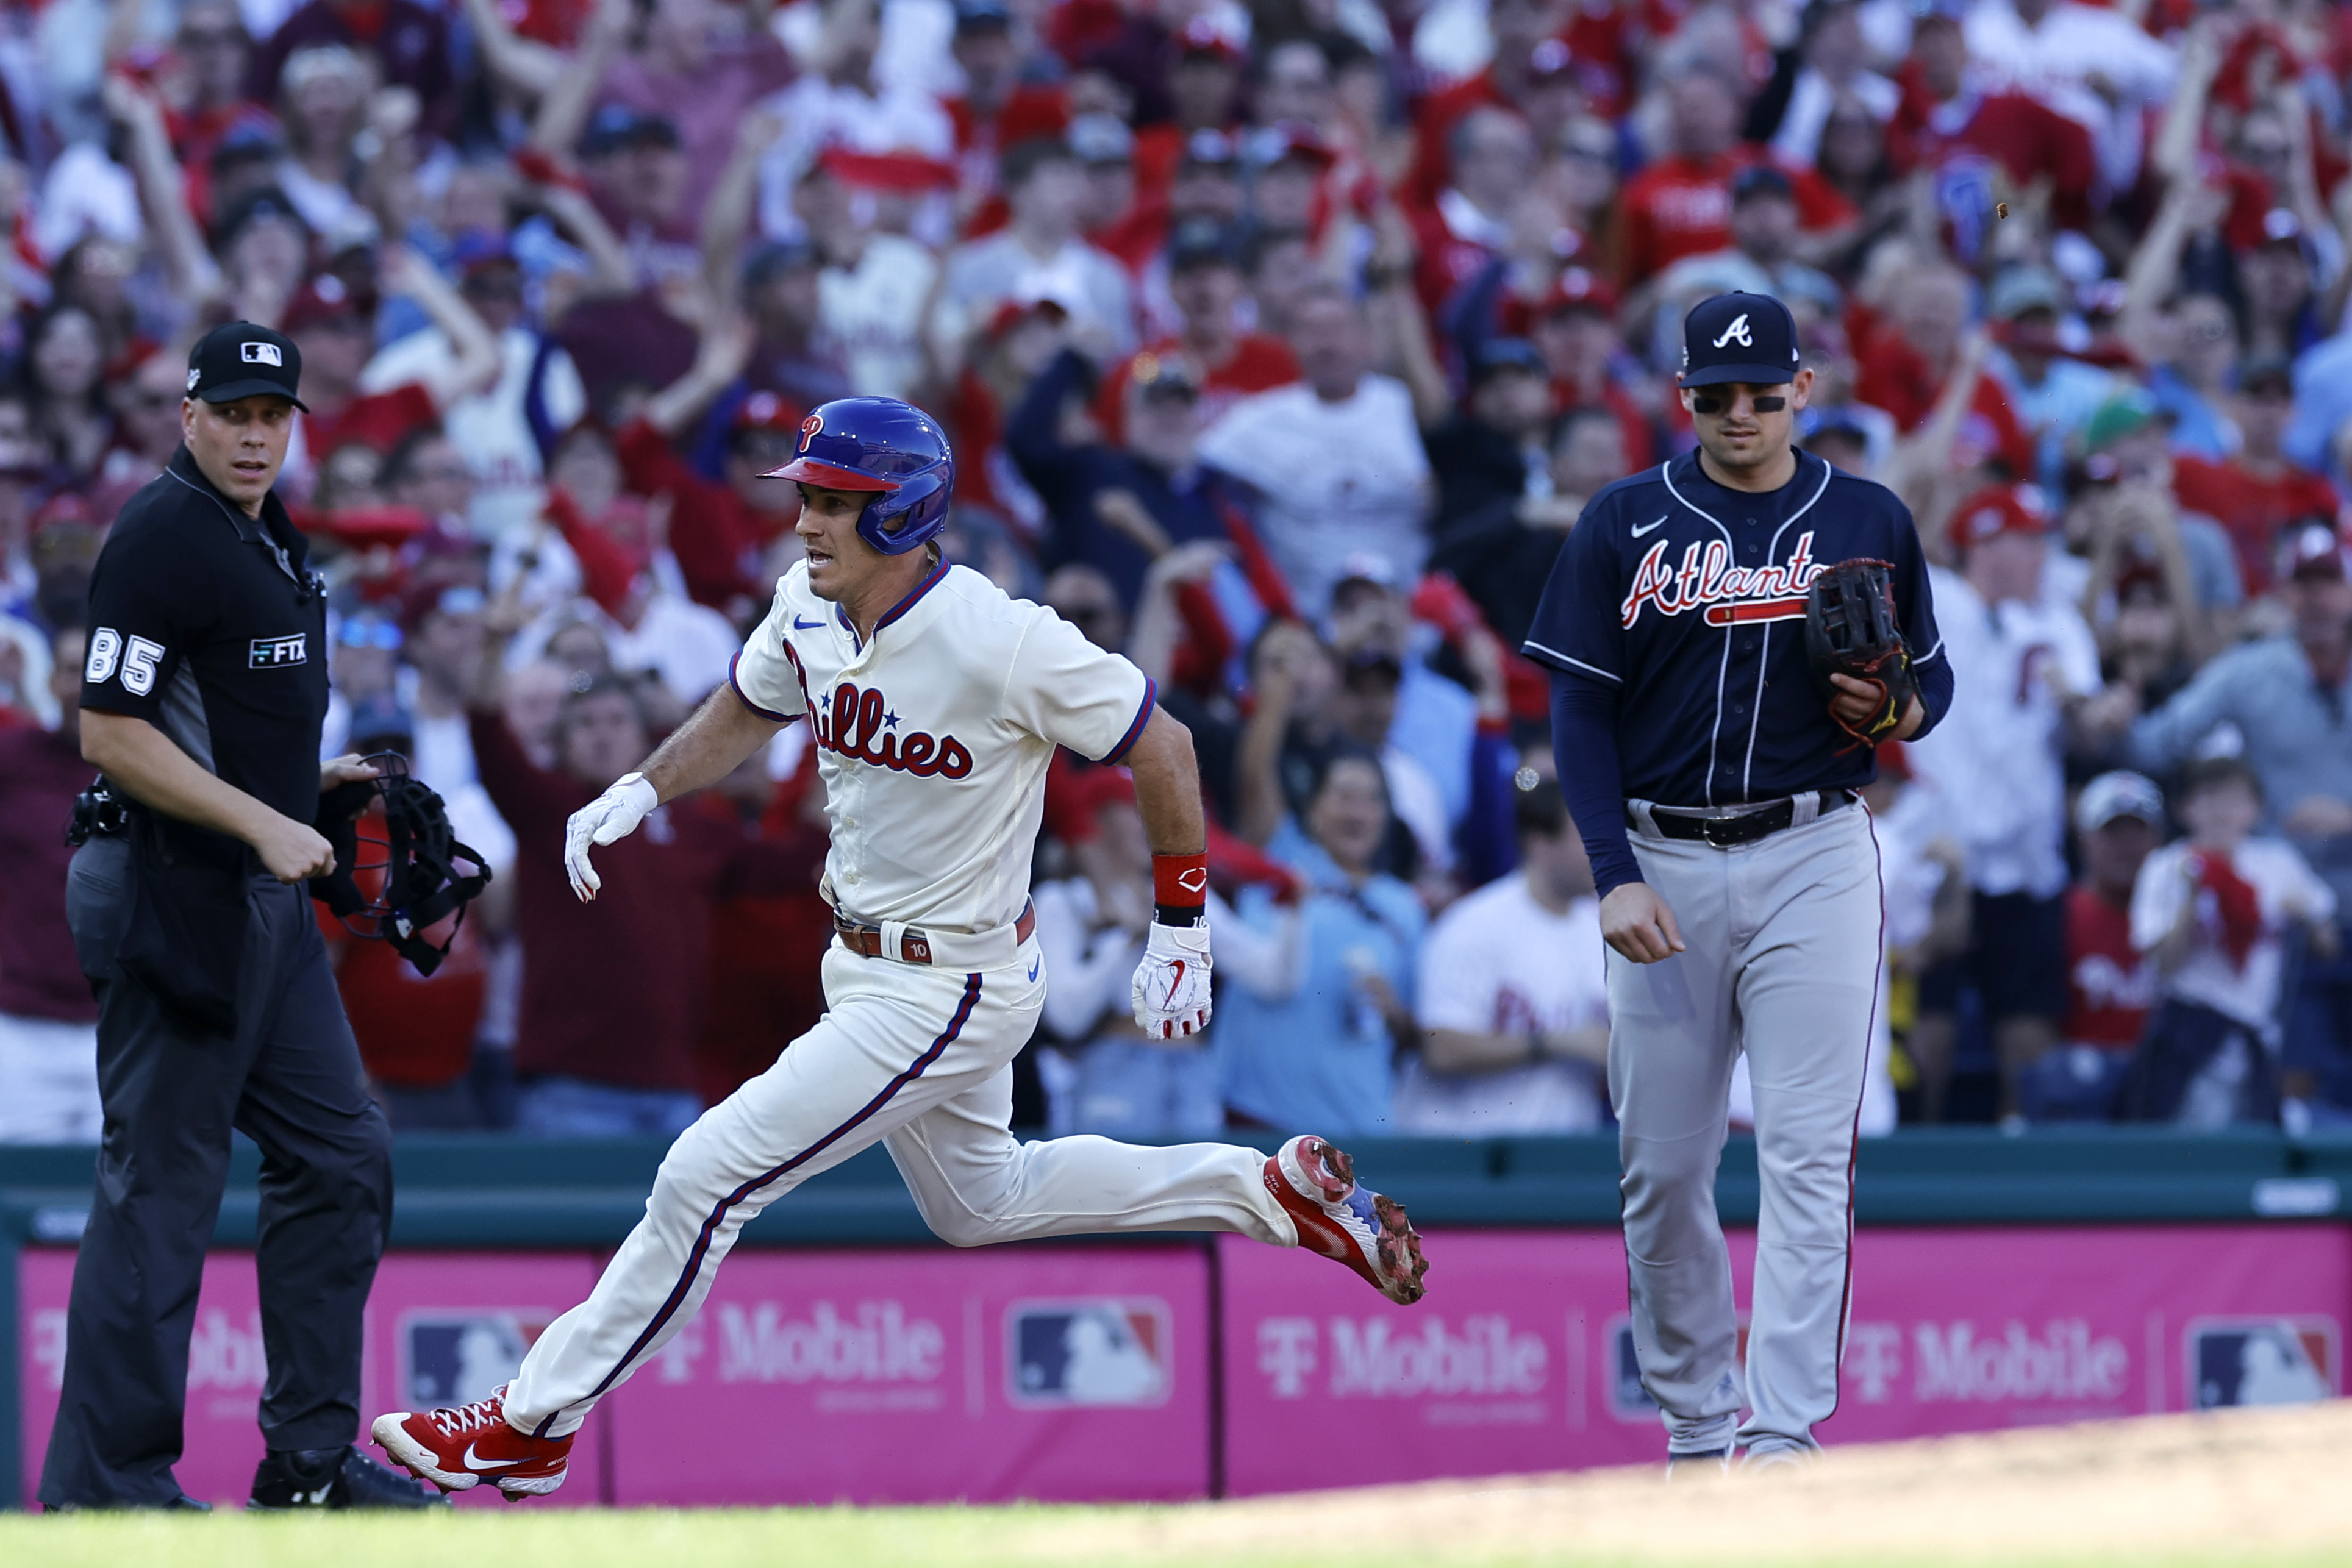 J.T. Realmuto Props, Betting Odds and Stats vs. the Braves - August 2, 2022